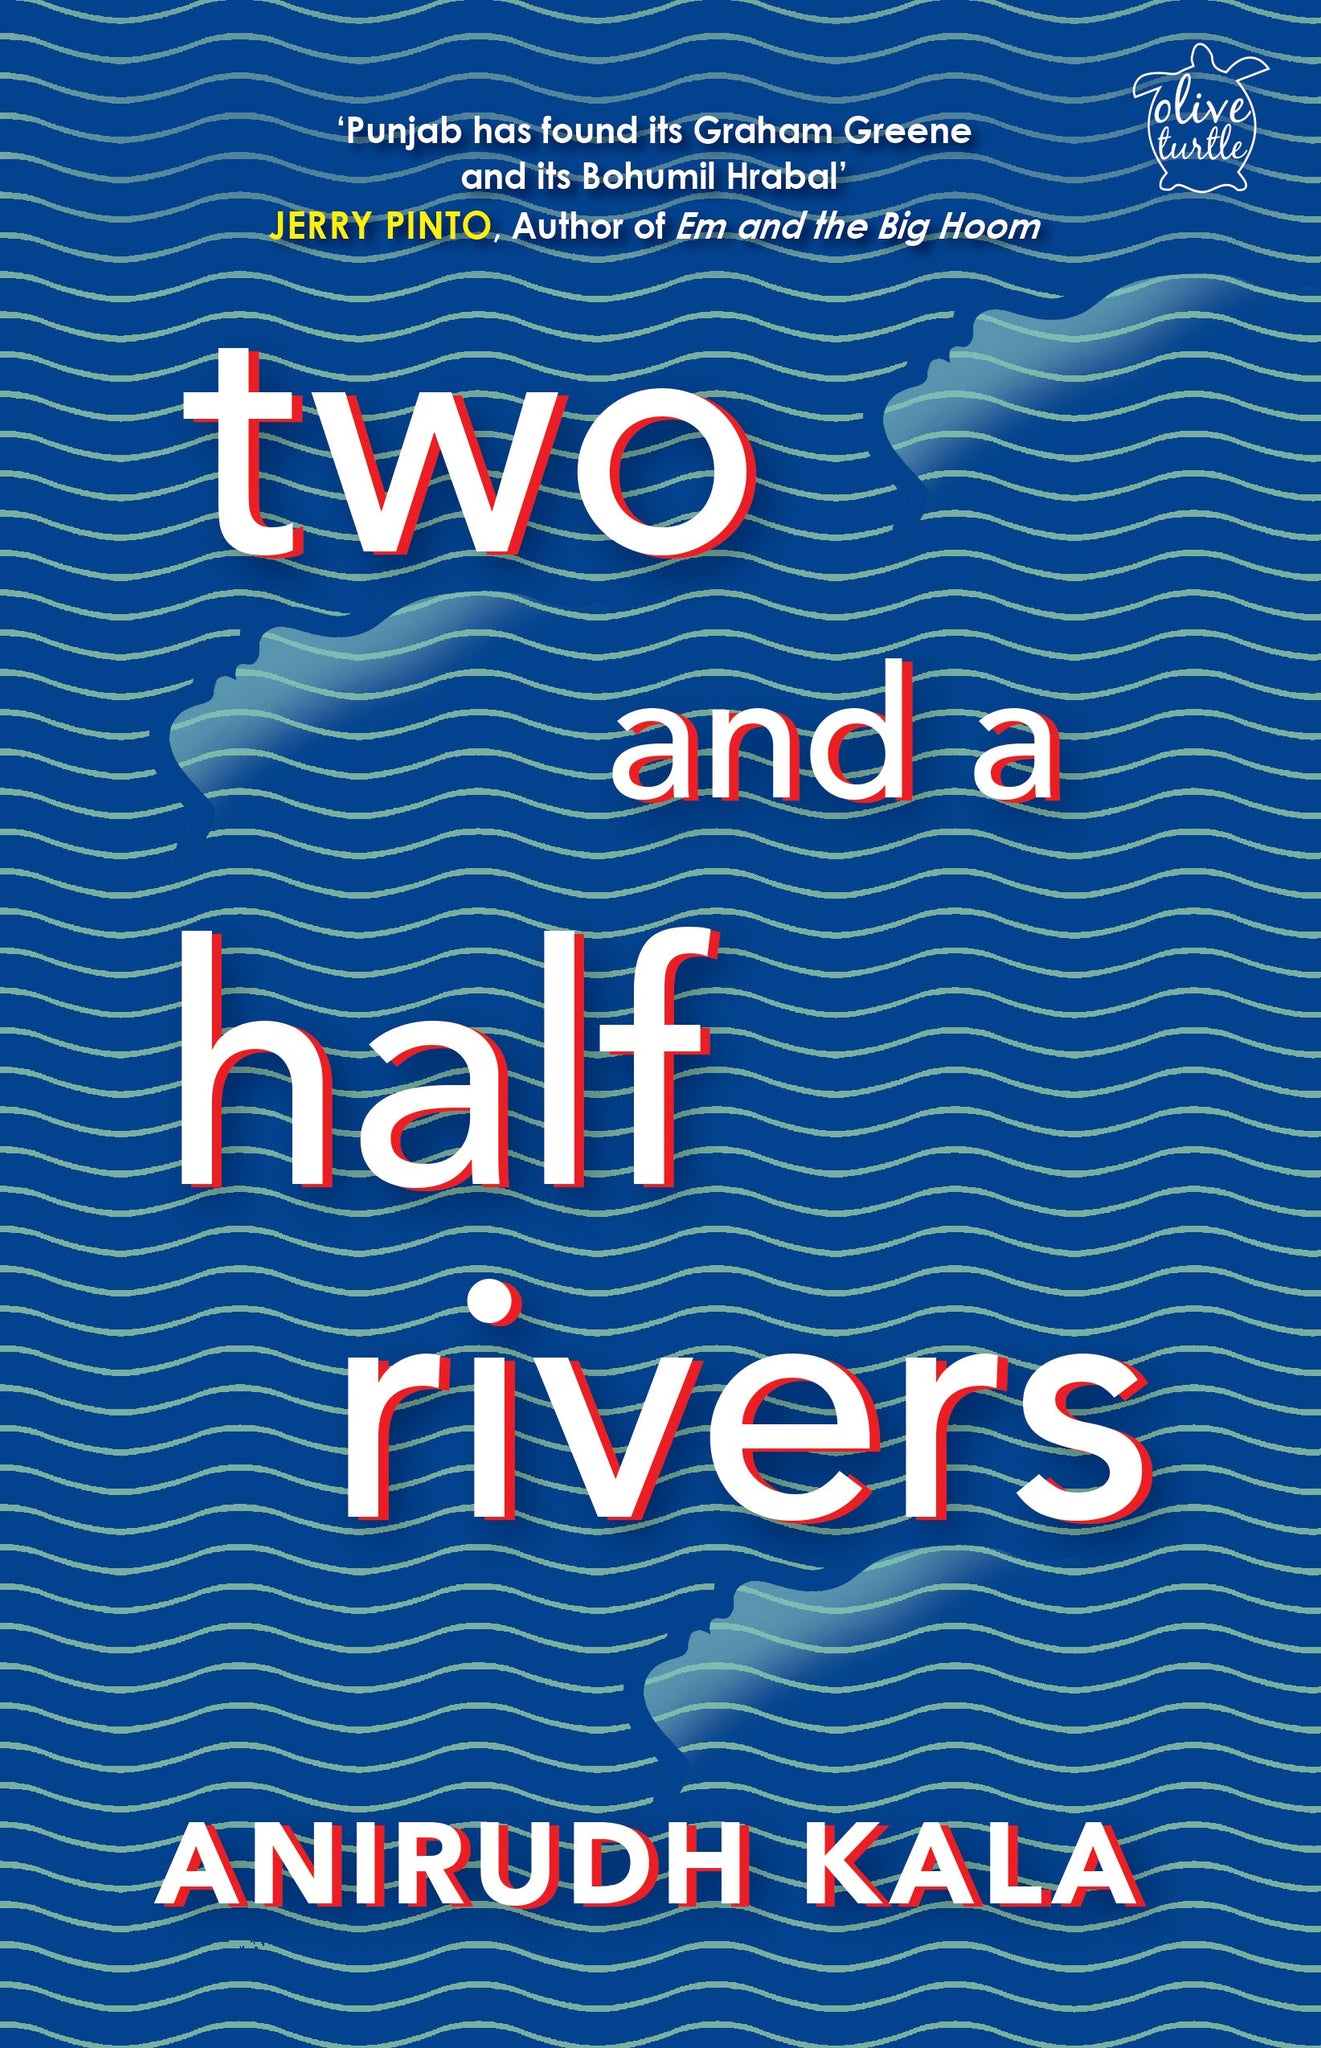 Two and a Half Rivers (P.B)